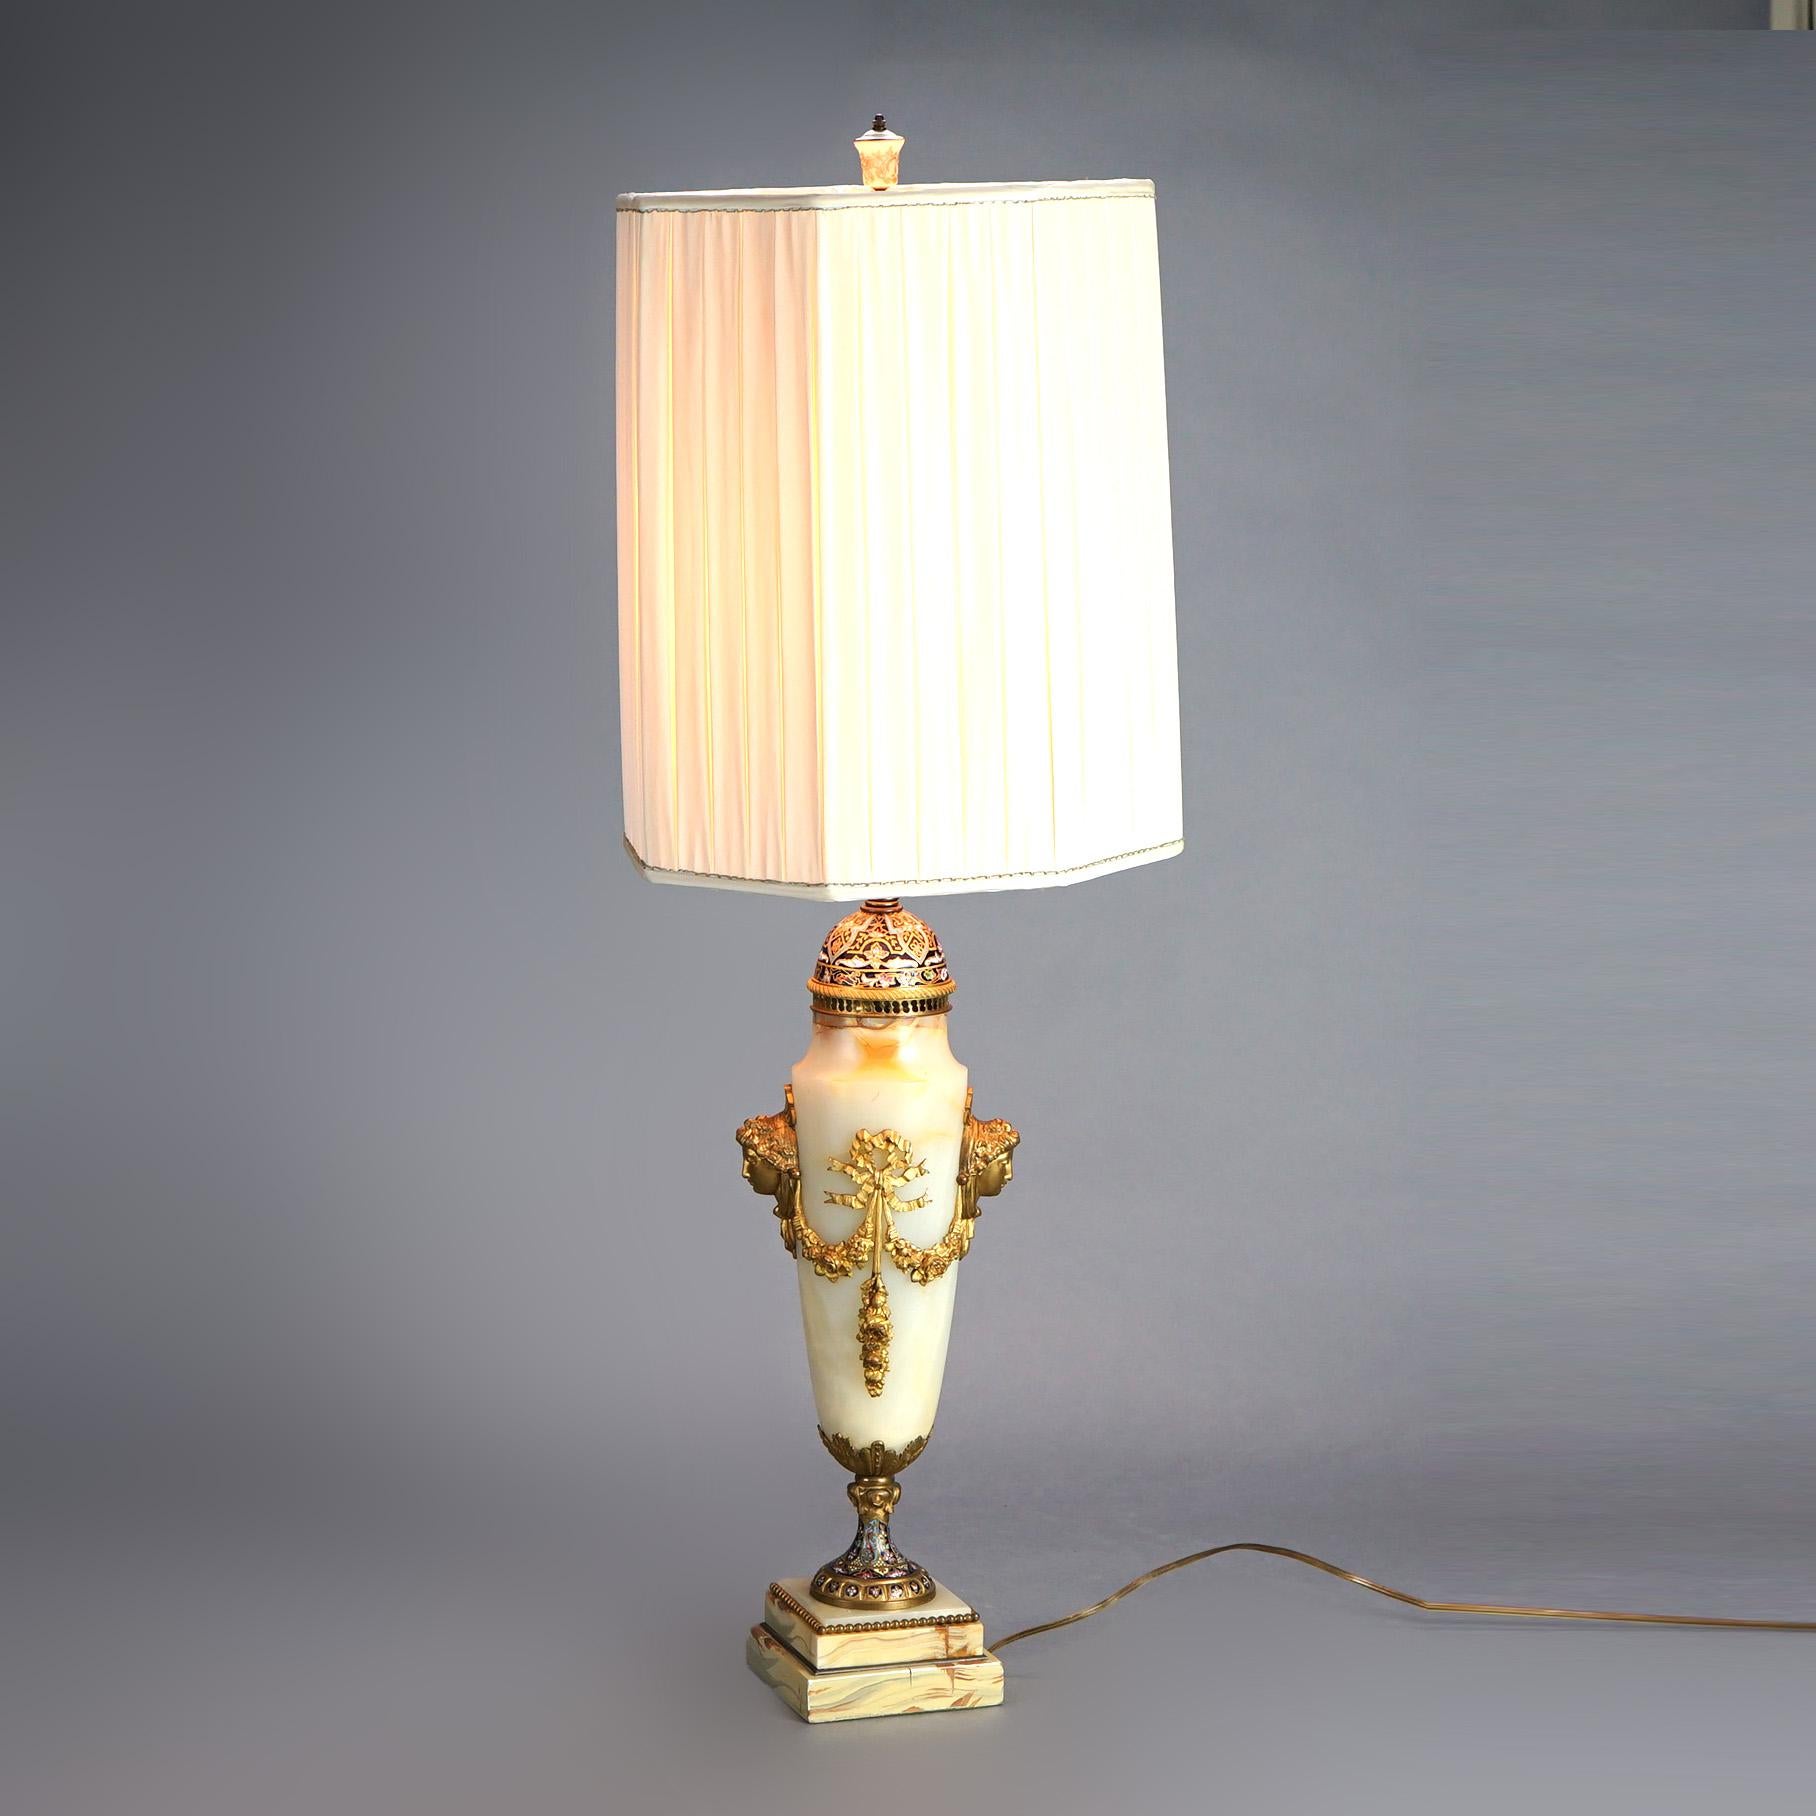 American Antique French Onyx, Ormolu & Champleve Enameled Table Lamp Circa 1920